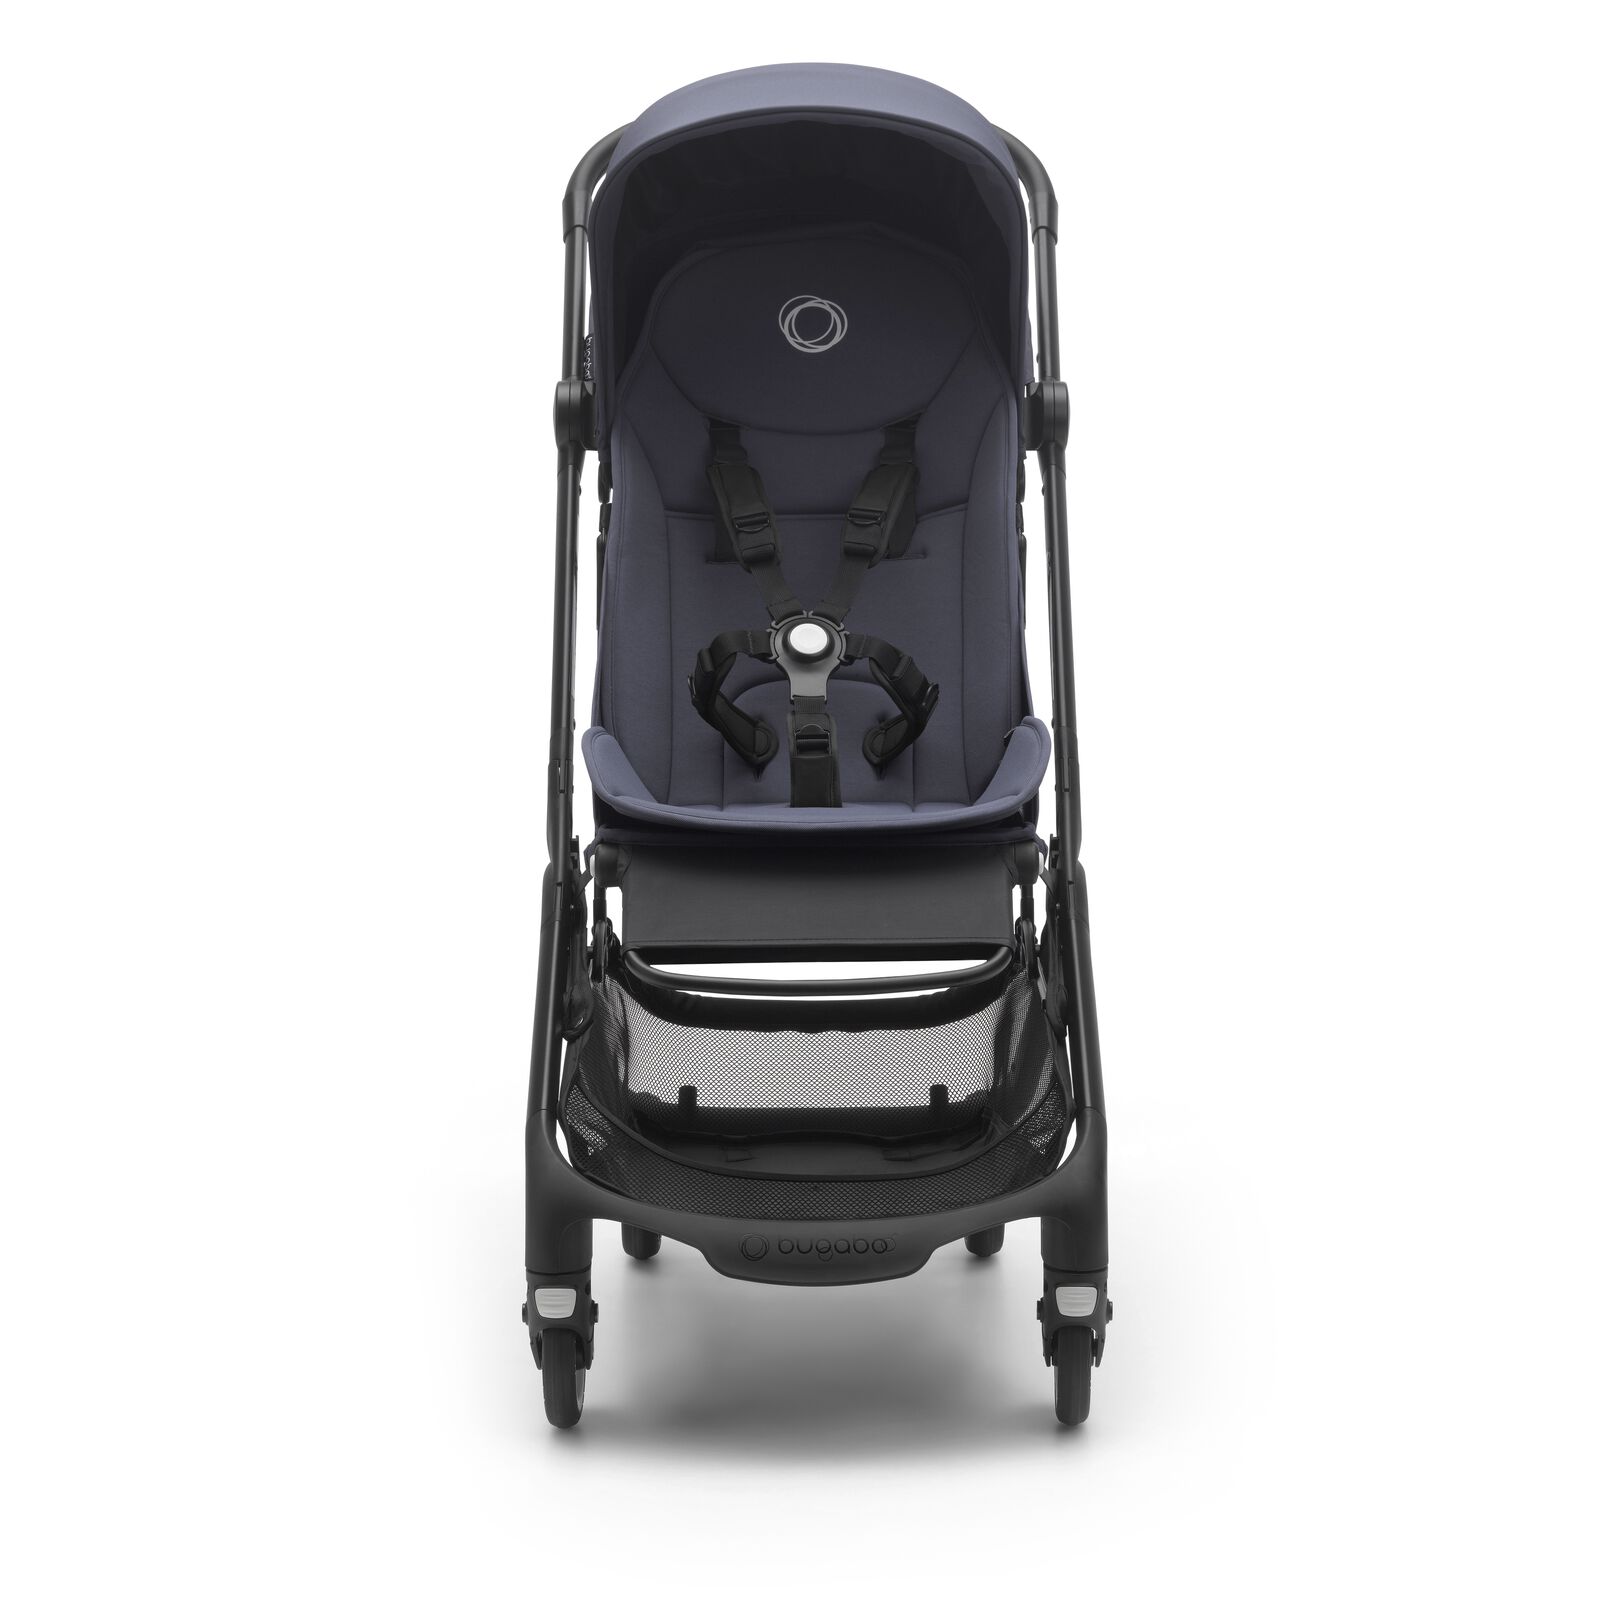 Bugaboo Butterfly seat pram - View 16